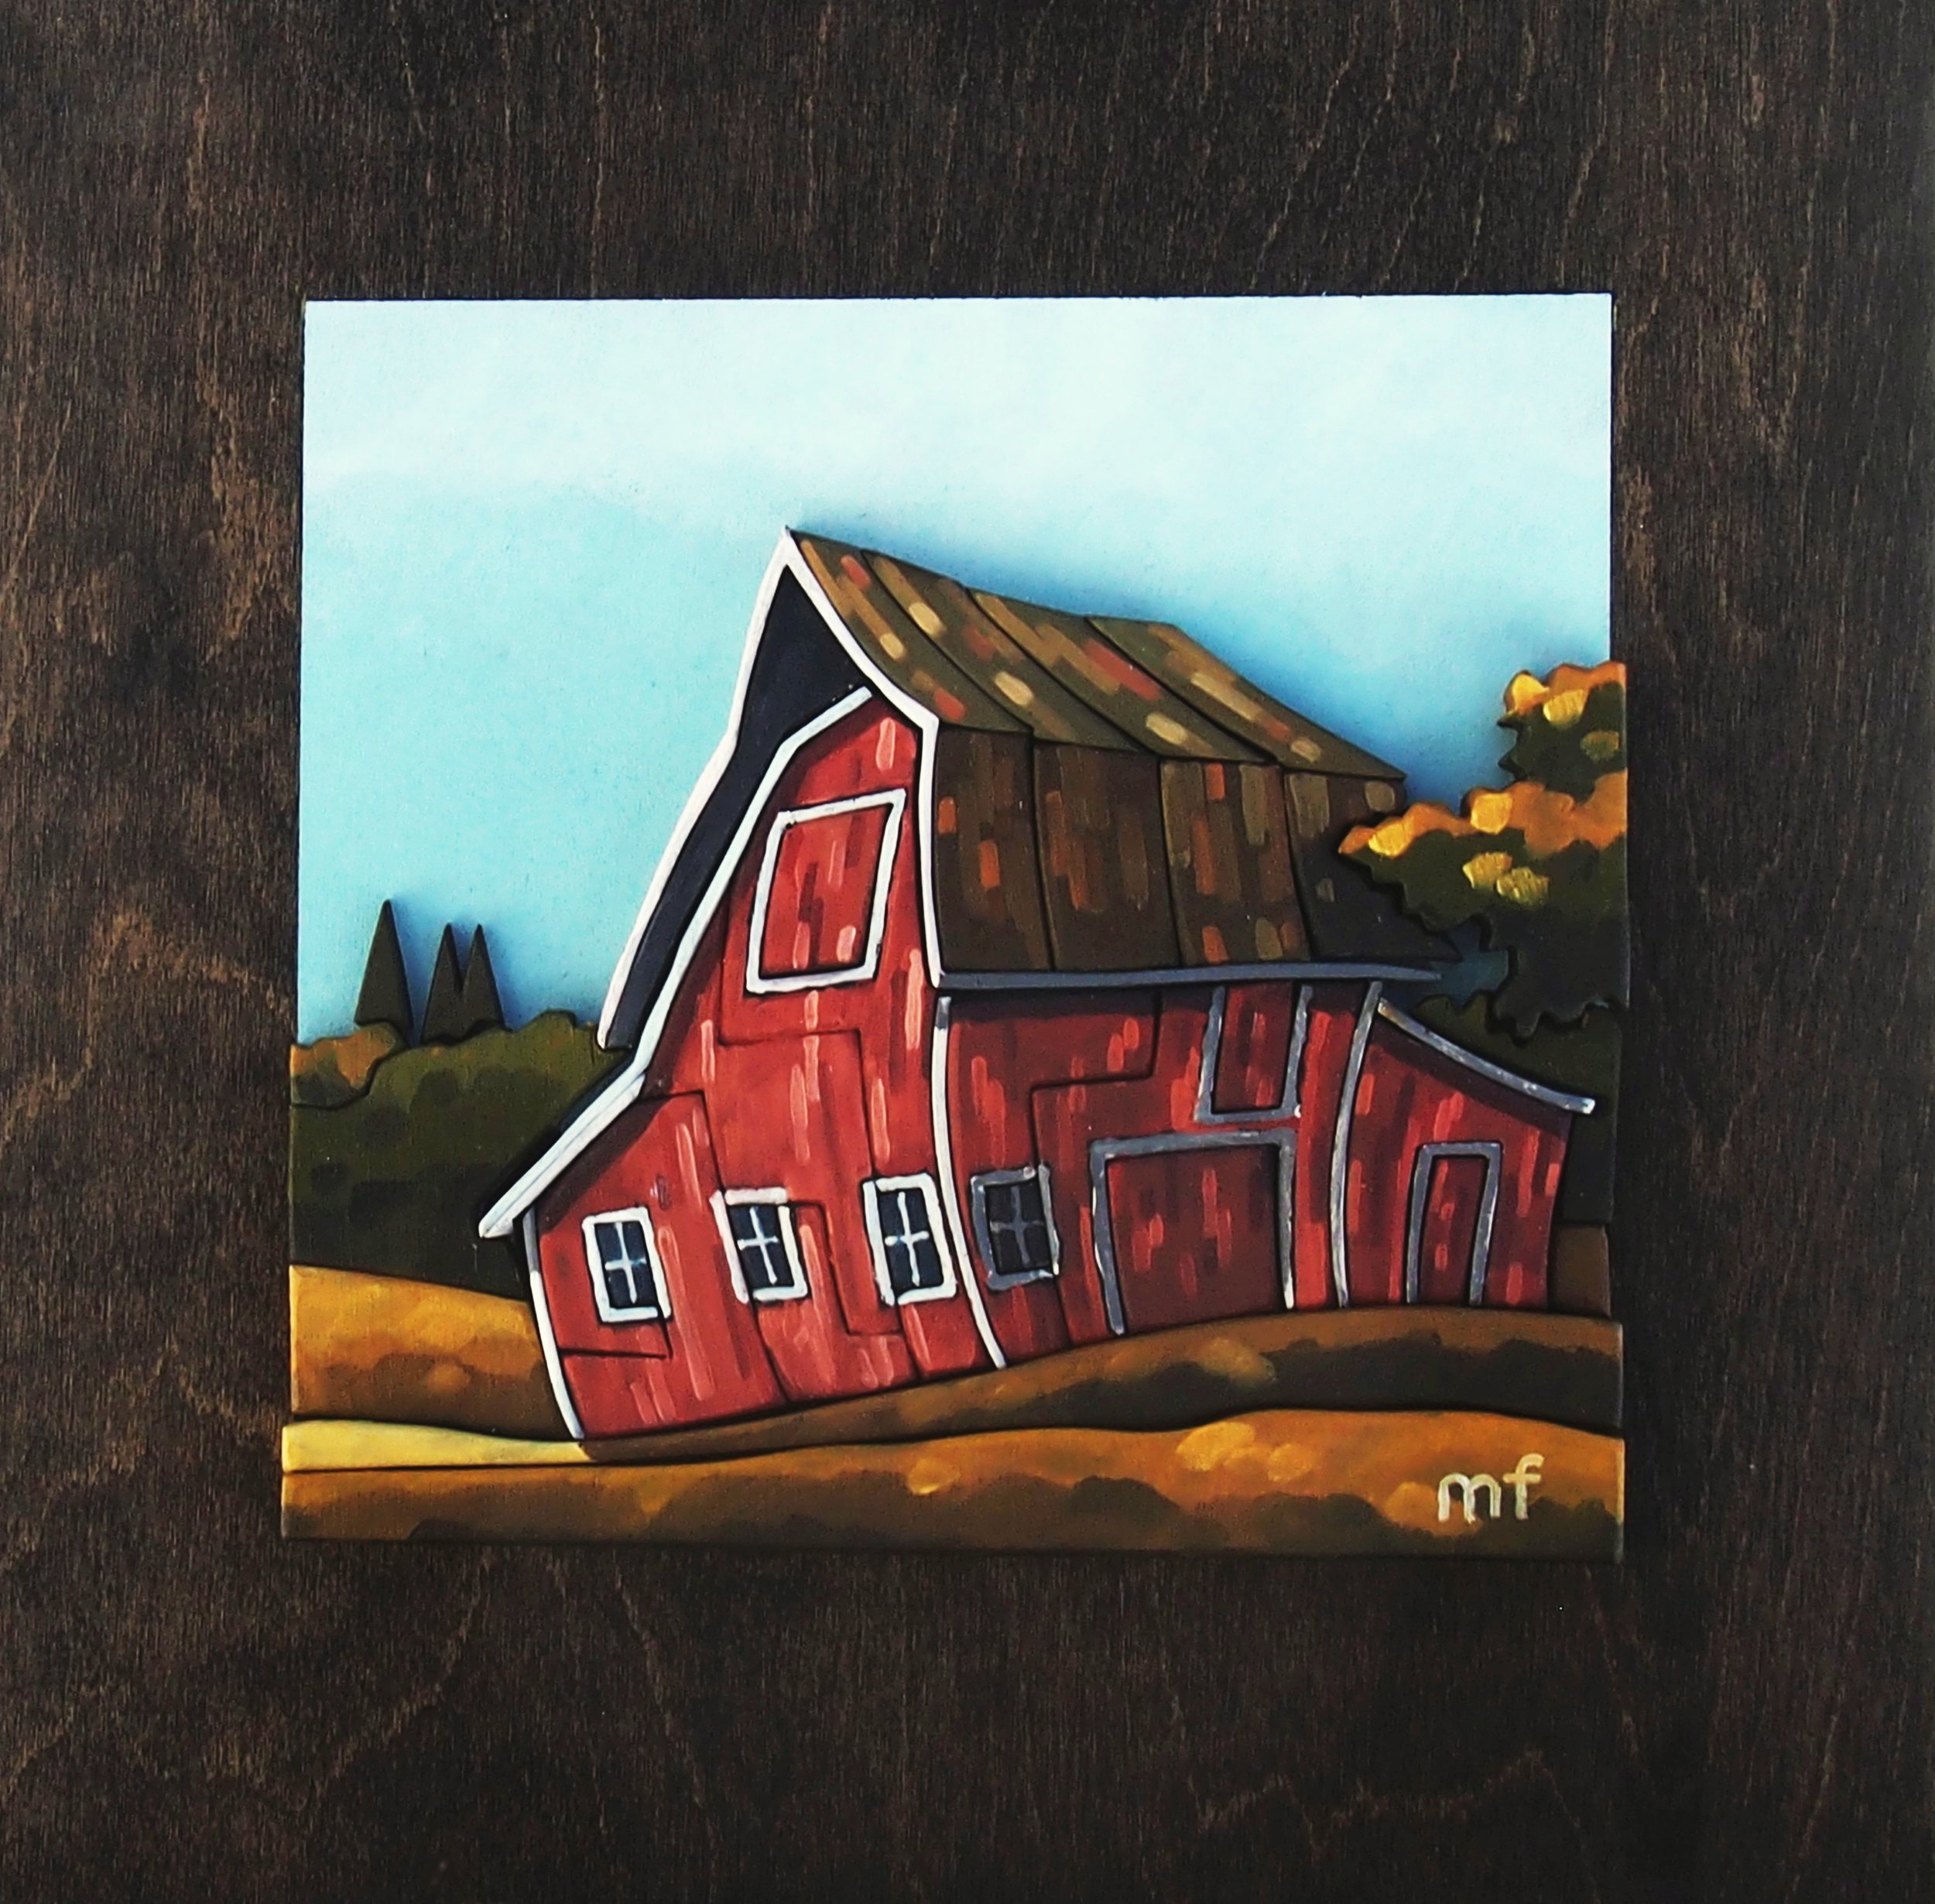 On the Farm, 3-D mixed media barn painting by Mark Farand | Effusion Art Gallery, Invermere BC